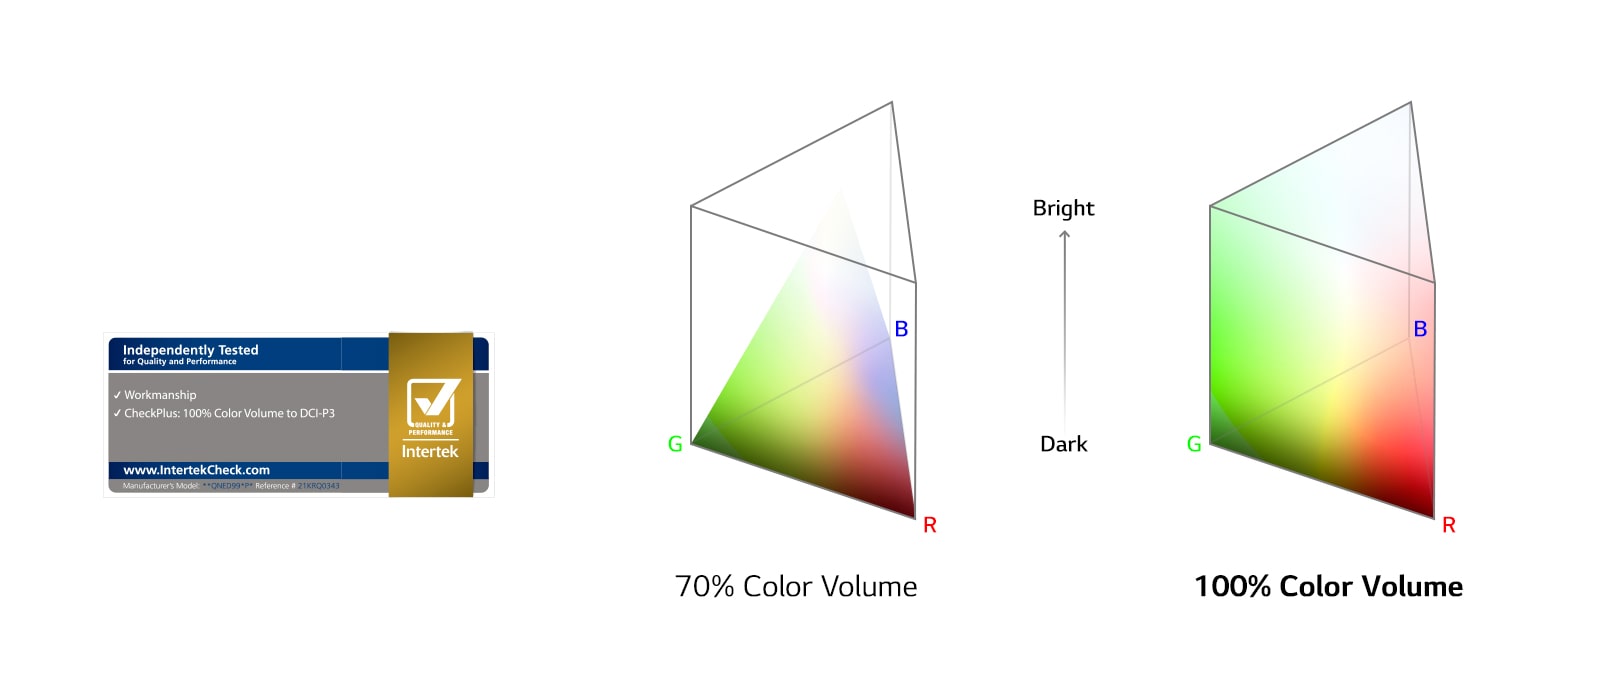 Side by side diagrams of color volume spectrums. The left shows 70% with color unable to reach the edges at the top. The right shows 100% with color reaching the outside edges of the diagram in all places.